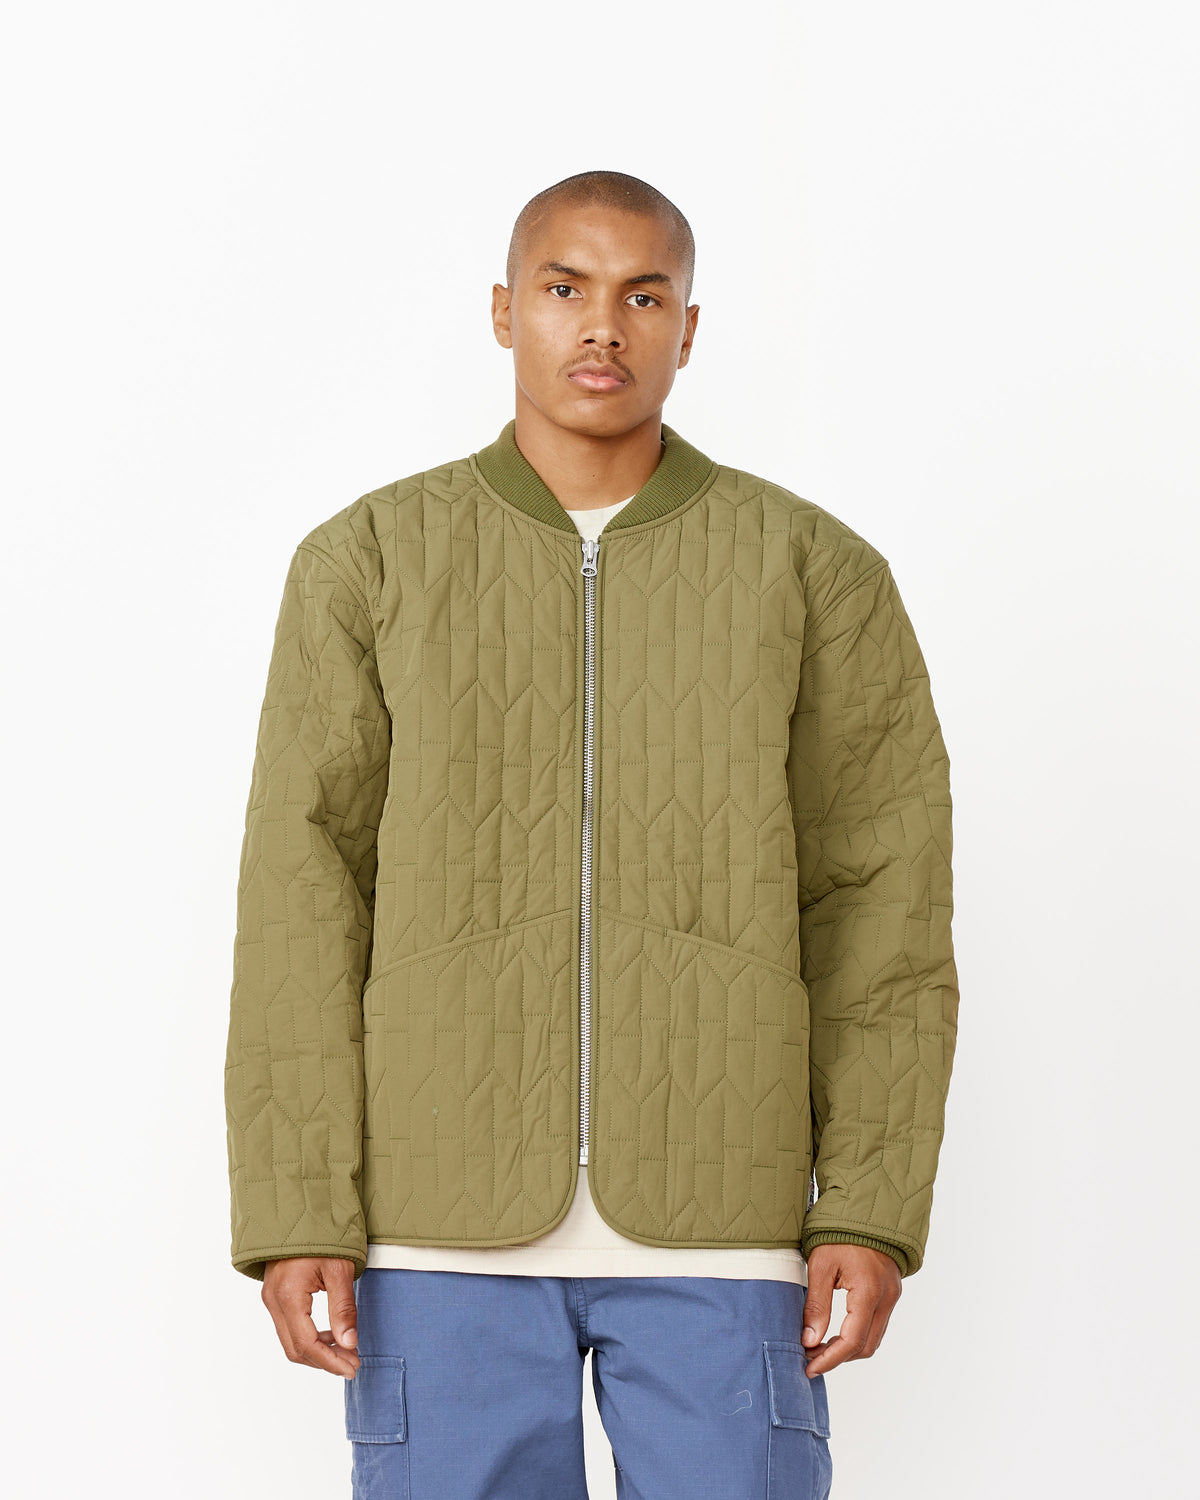 You can get the look for less Buy S Quilted Liner Jacket in Olive